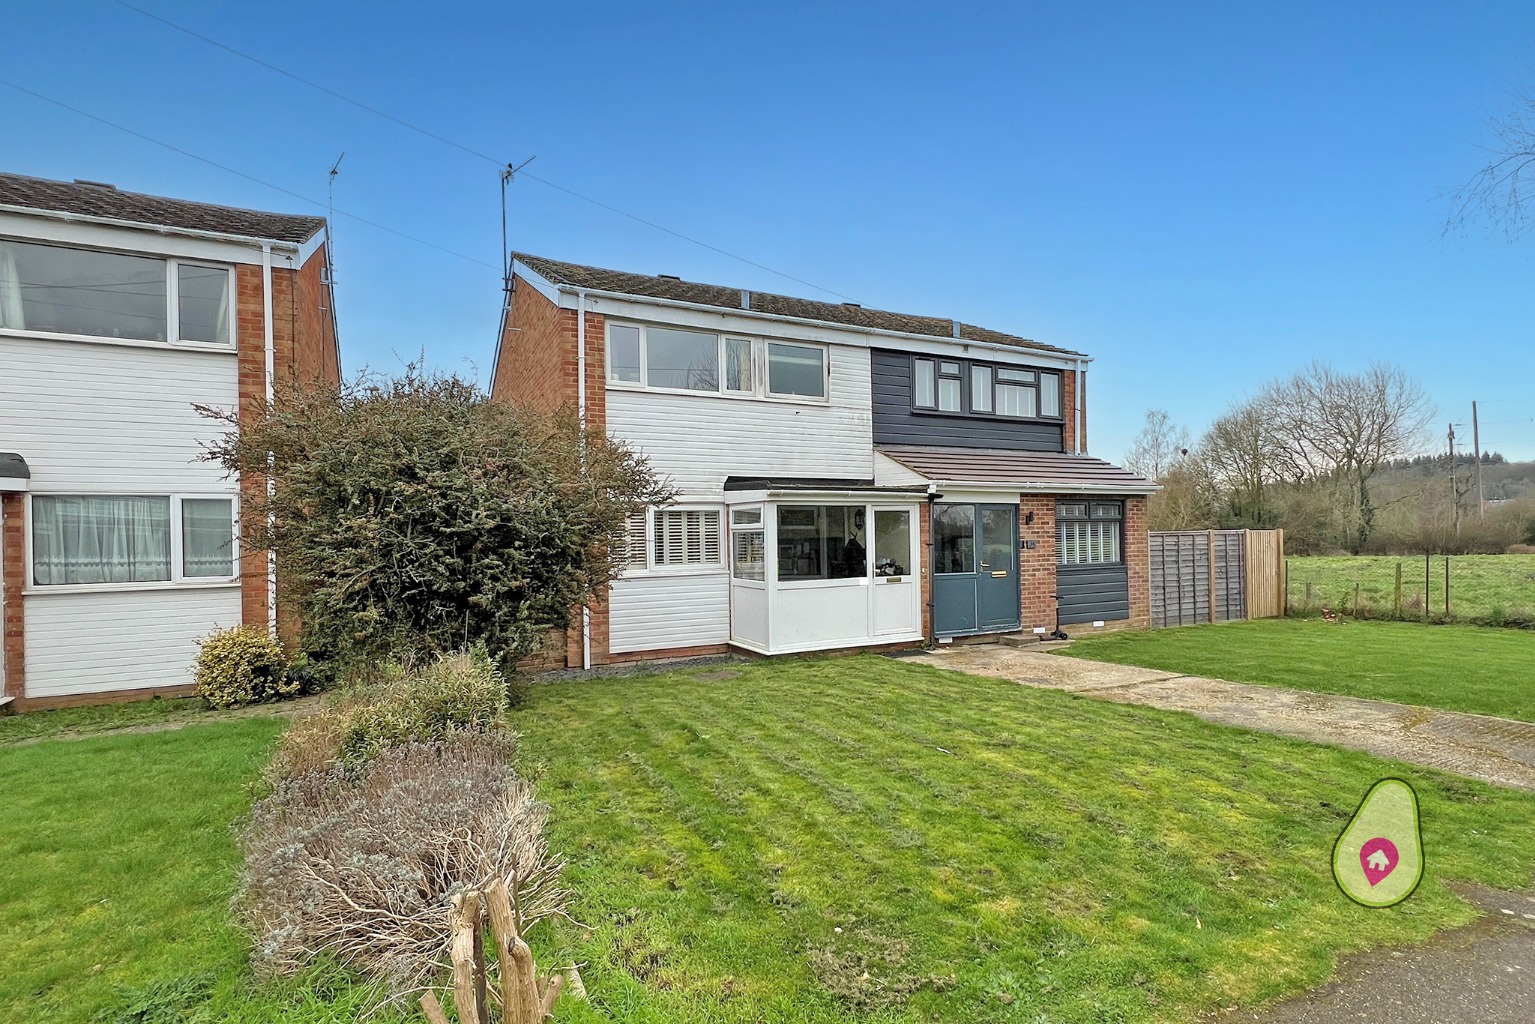 3 bed semi-detached house for sale in Kennedy Drive, Reading - Property Image 1